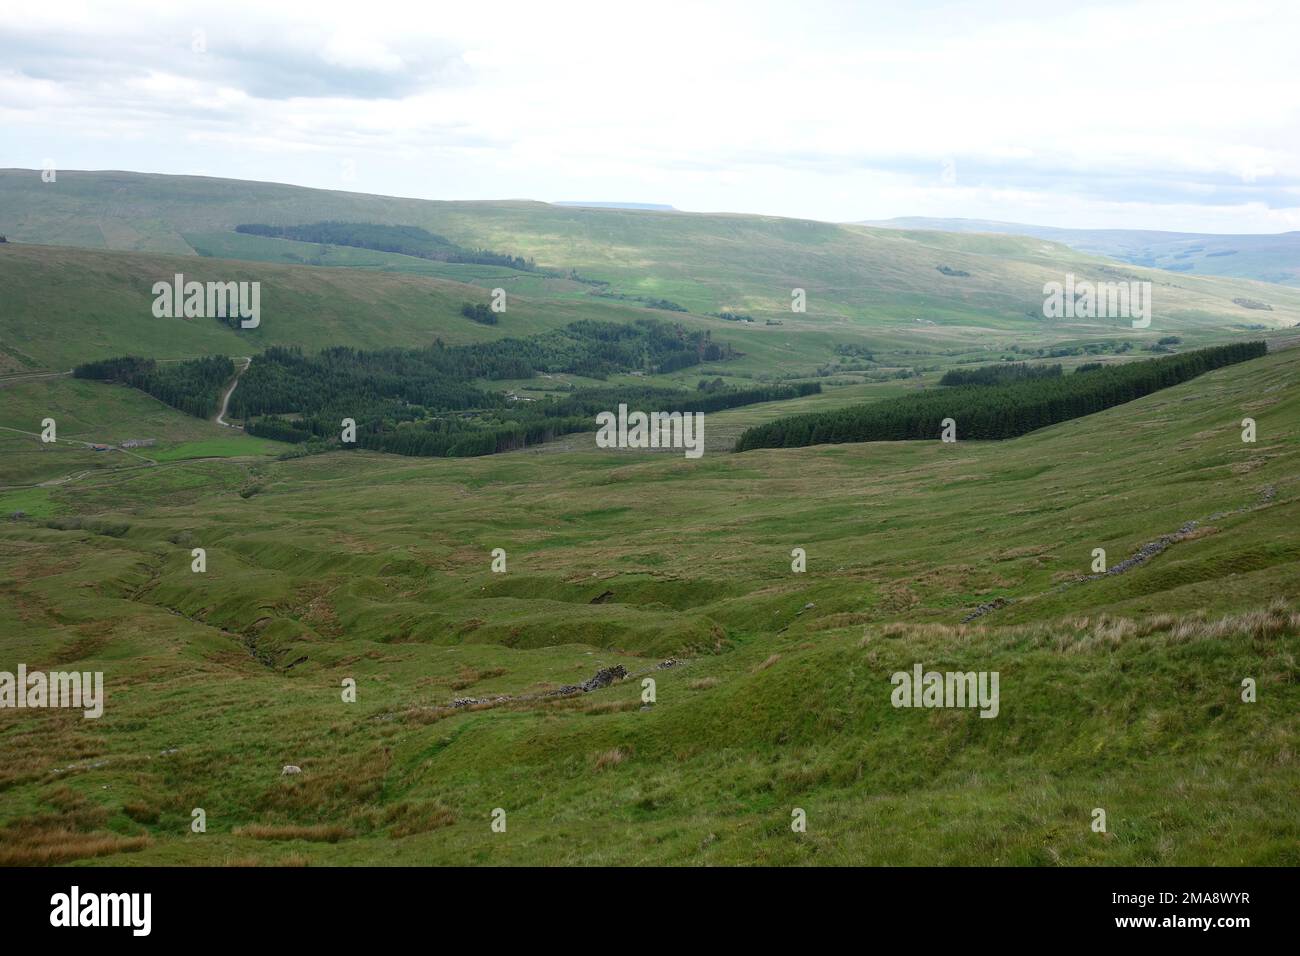 The Hidden Dale of Snaizeholme from the Pennine Way/West Cam Road near Hawes in Wensleydale, Yorkshire Dales National Park, England, UK. Stock Photo